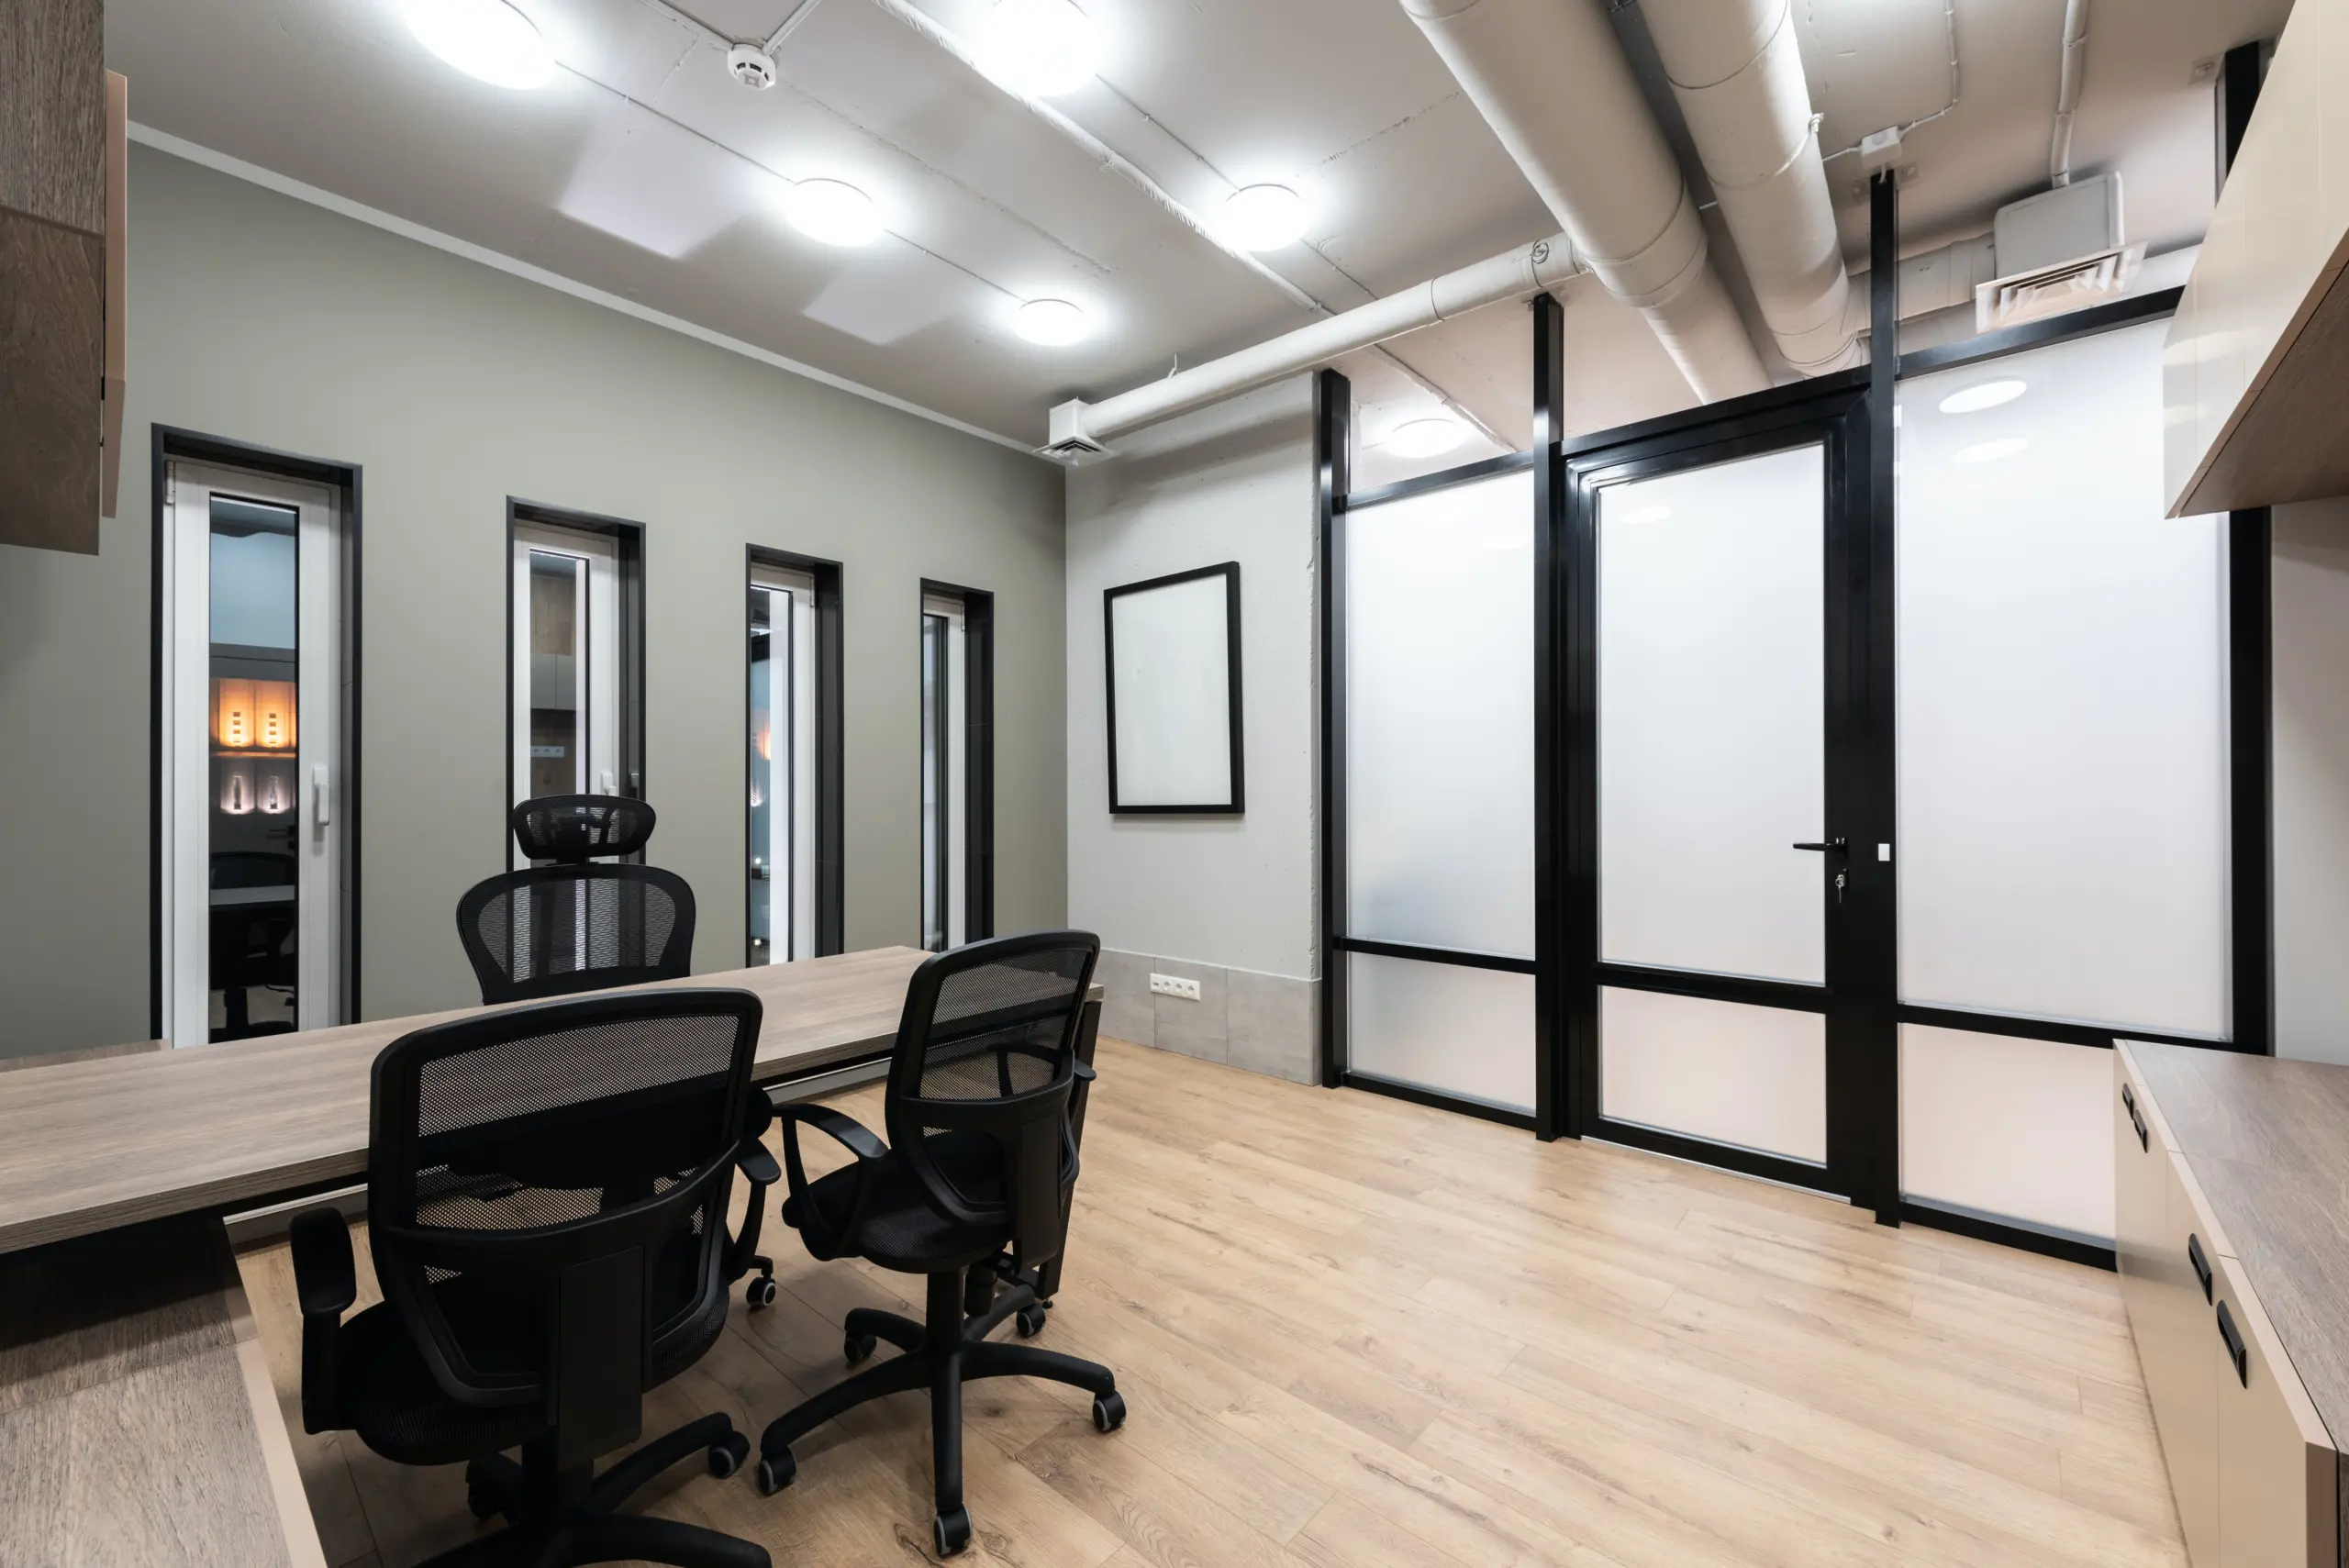 office interior design done for small business office room